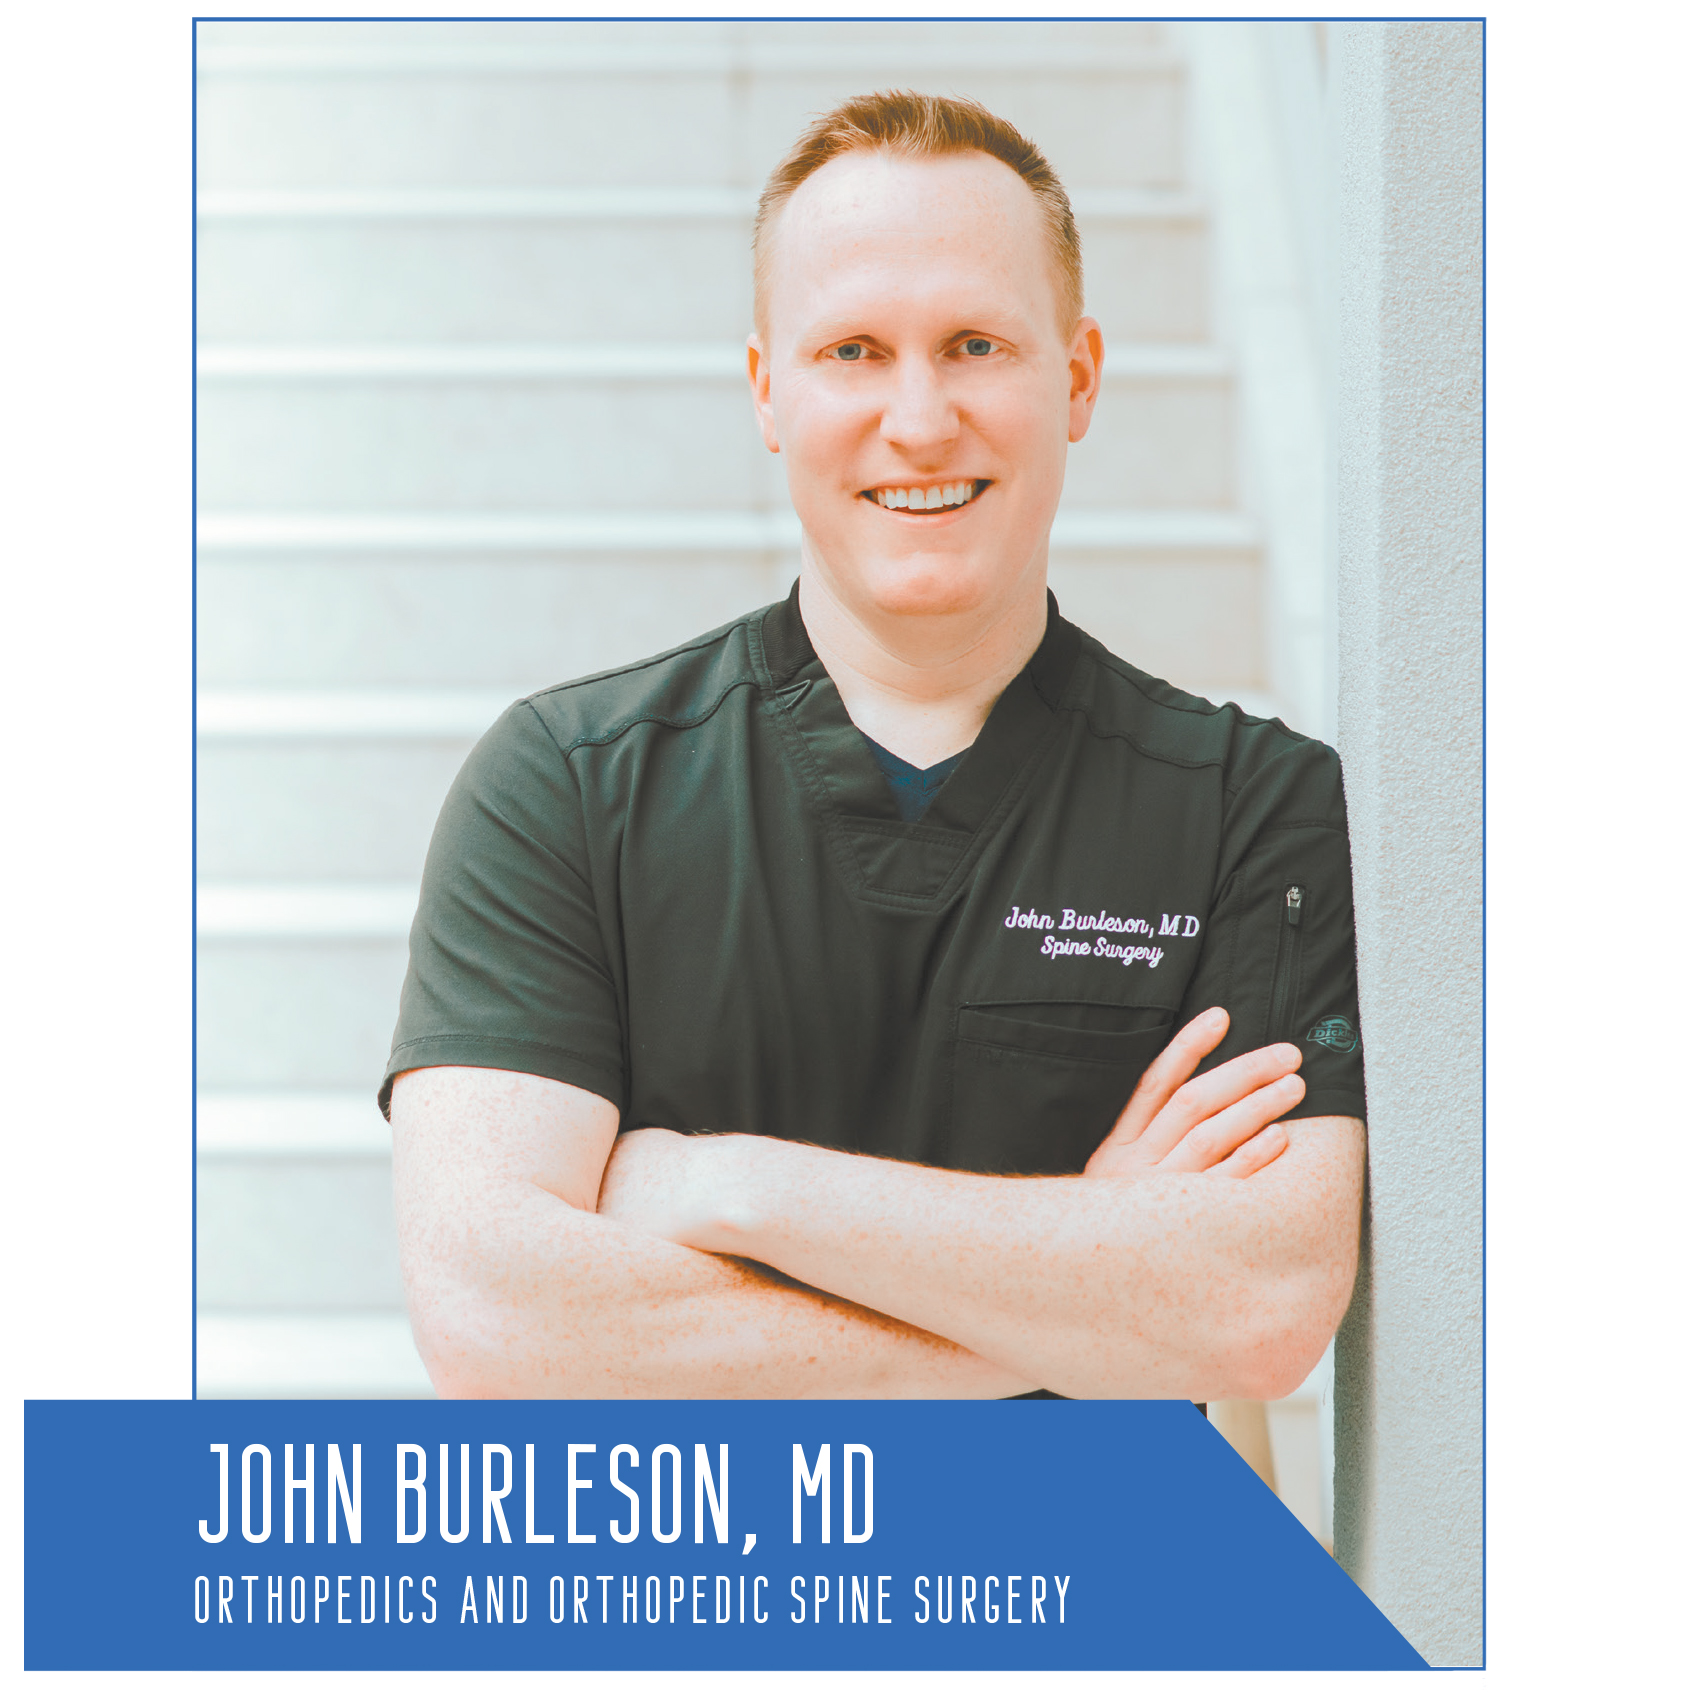 Medical Professionals Magazine features John Burleson, MD